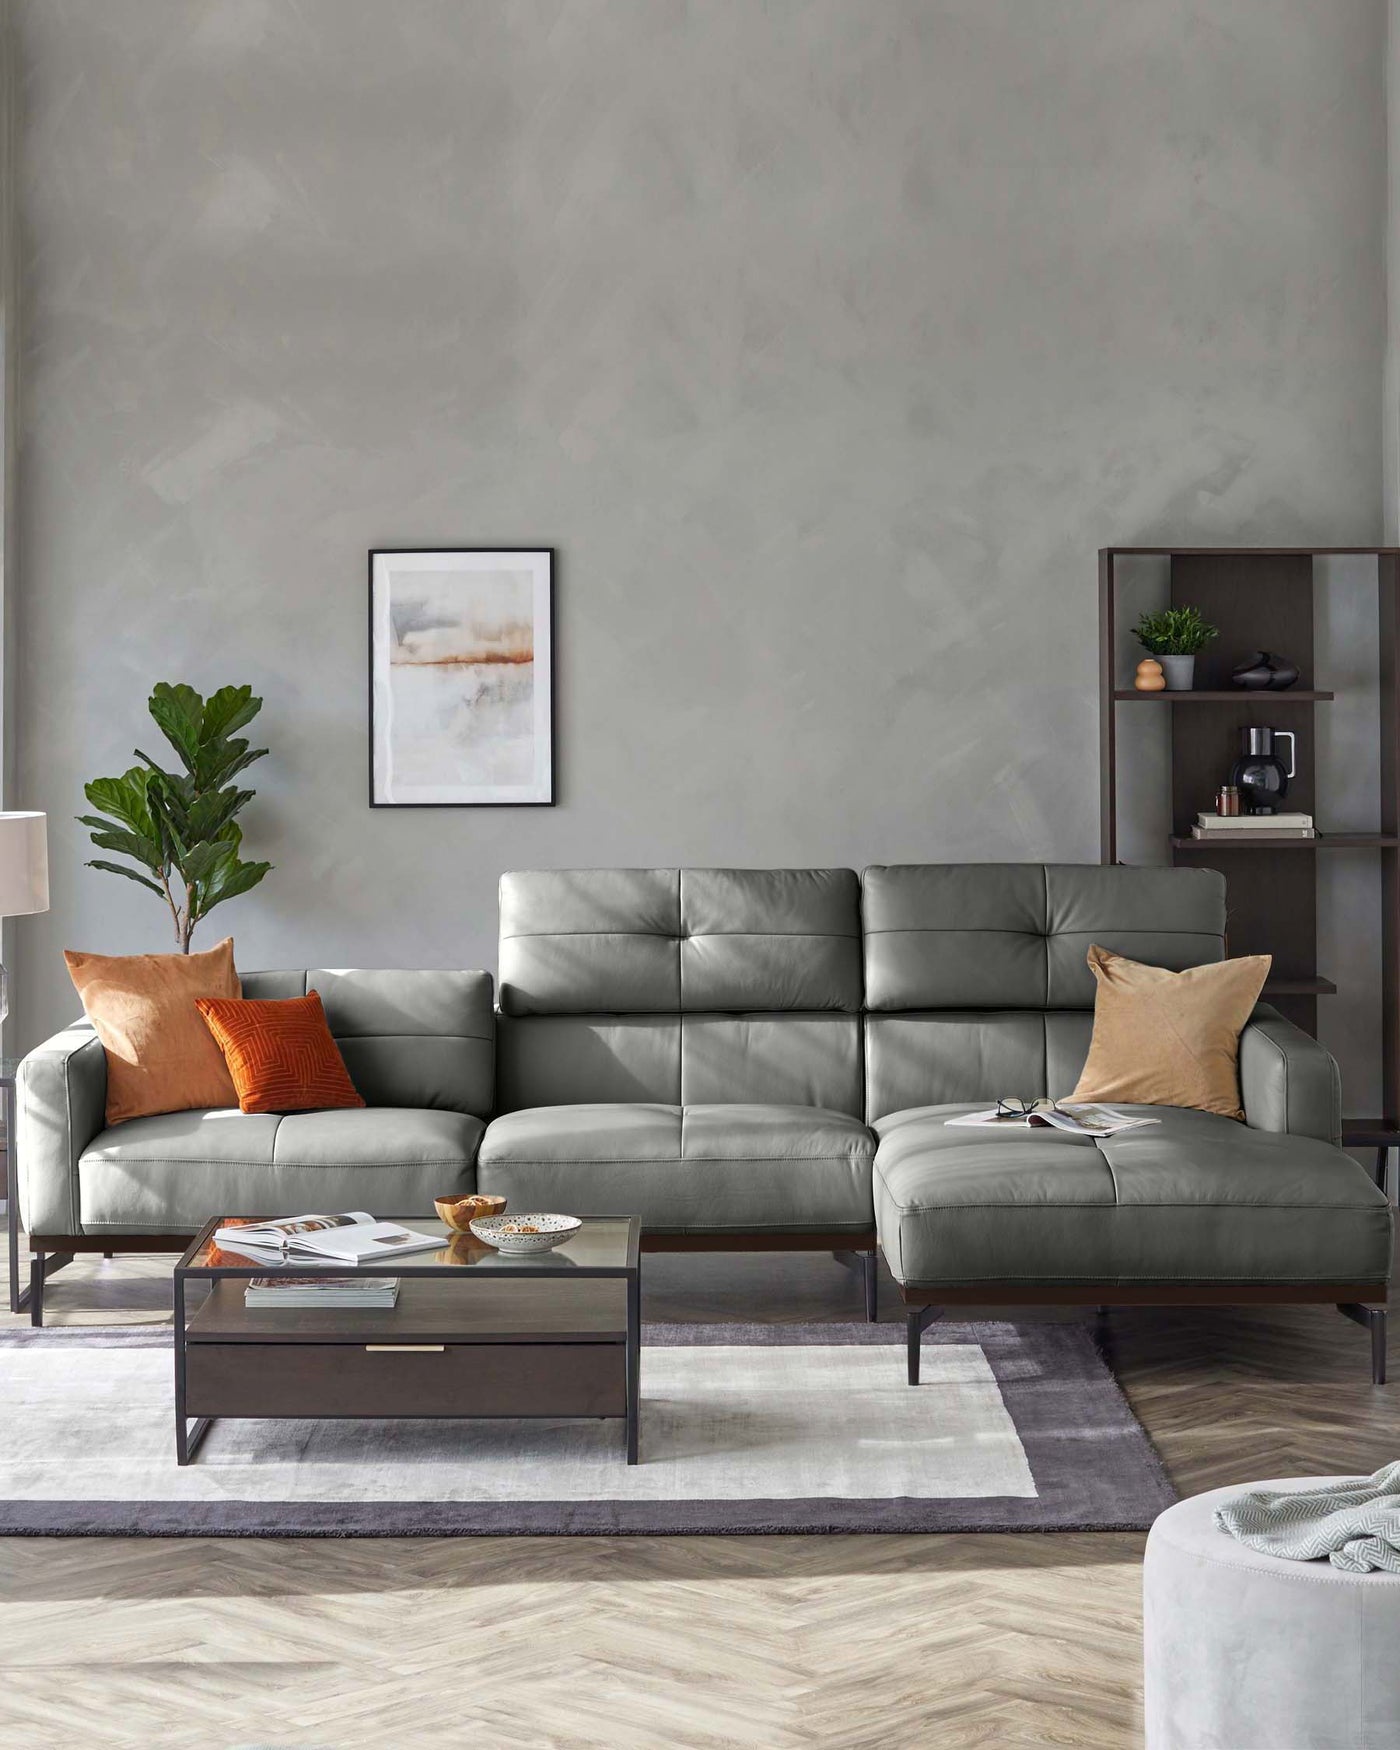 A modern living room featuring a sleek grey L-shaped sectional sofa with clean lines and plush cushions, complemented by orange decorative pillows. In front of the sofa is a contemporary rectangular coffee table with a glass top and dark wood base, displaying books and decorative items. A dark shelving unit stands to the right, subtly matching the coffee table and showcasing minimalistic decor and houseplants. The room is completed with a soft-toned area rug underneath.